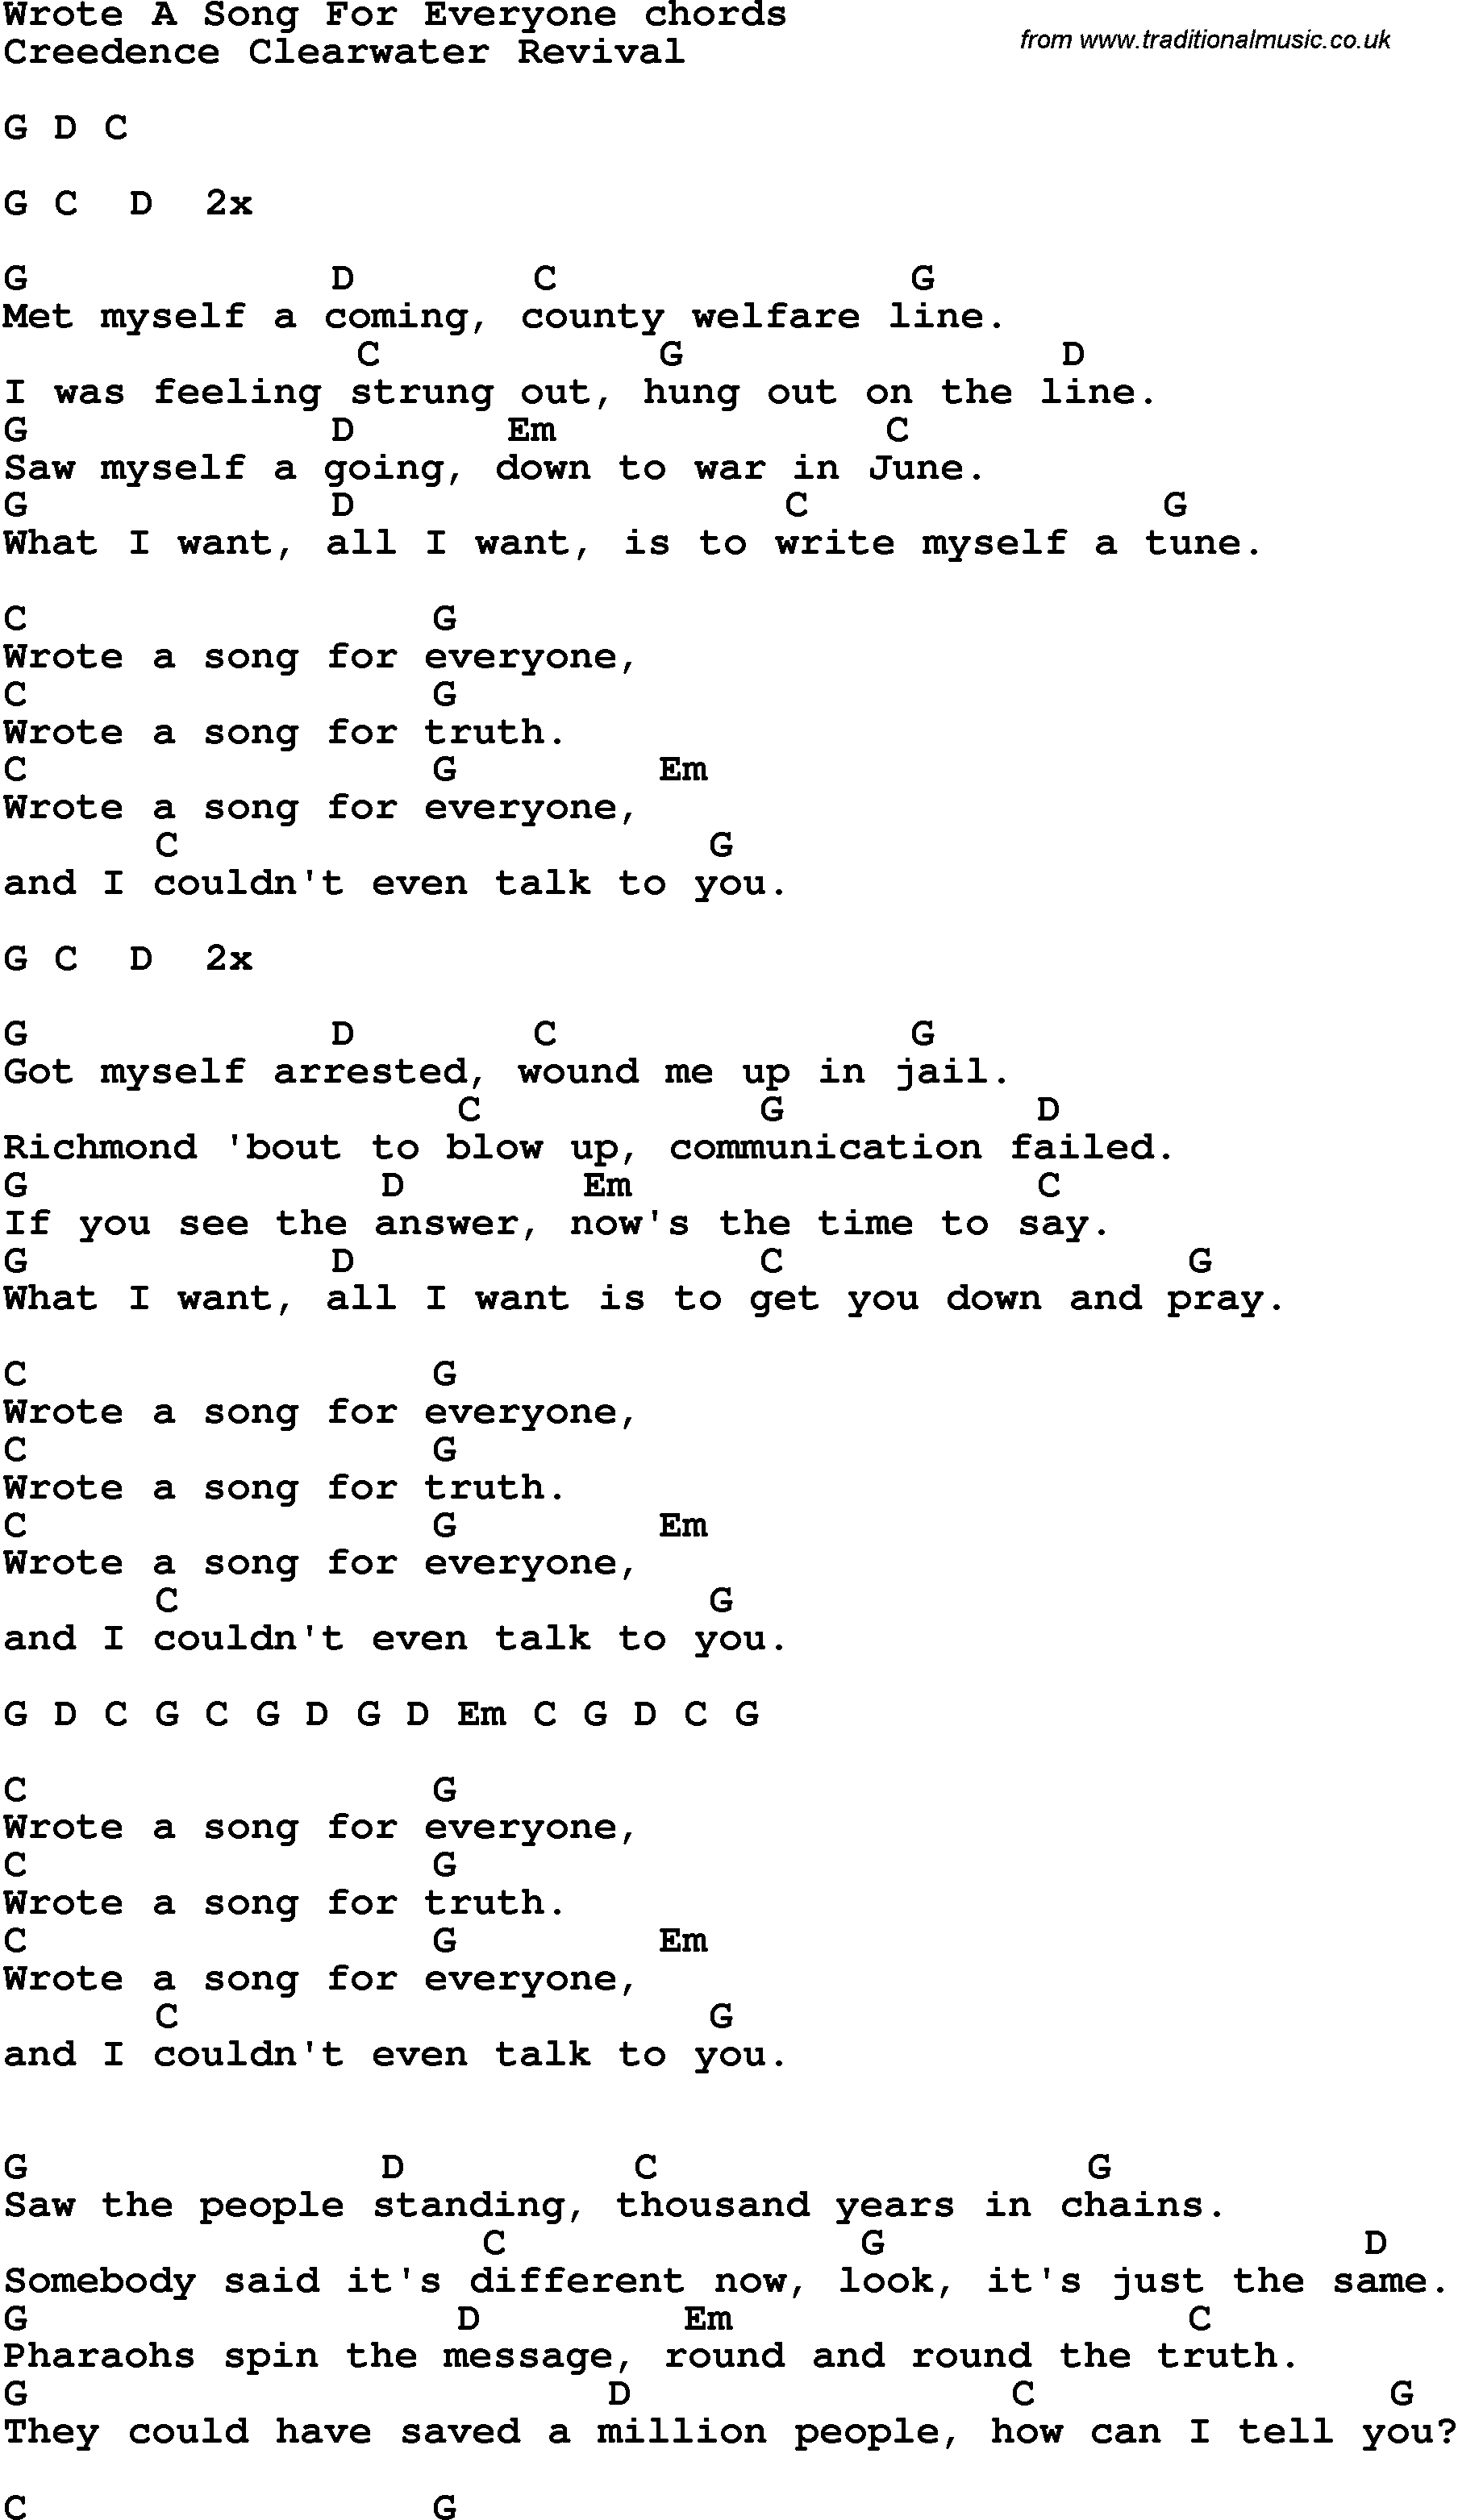 Song Lyrics with guitar chords for Wrote A Song For Everyone